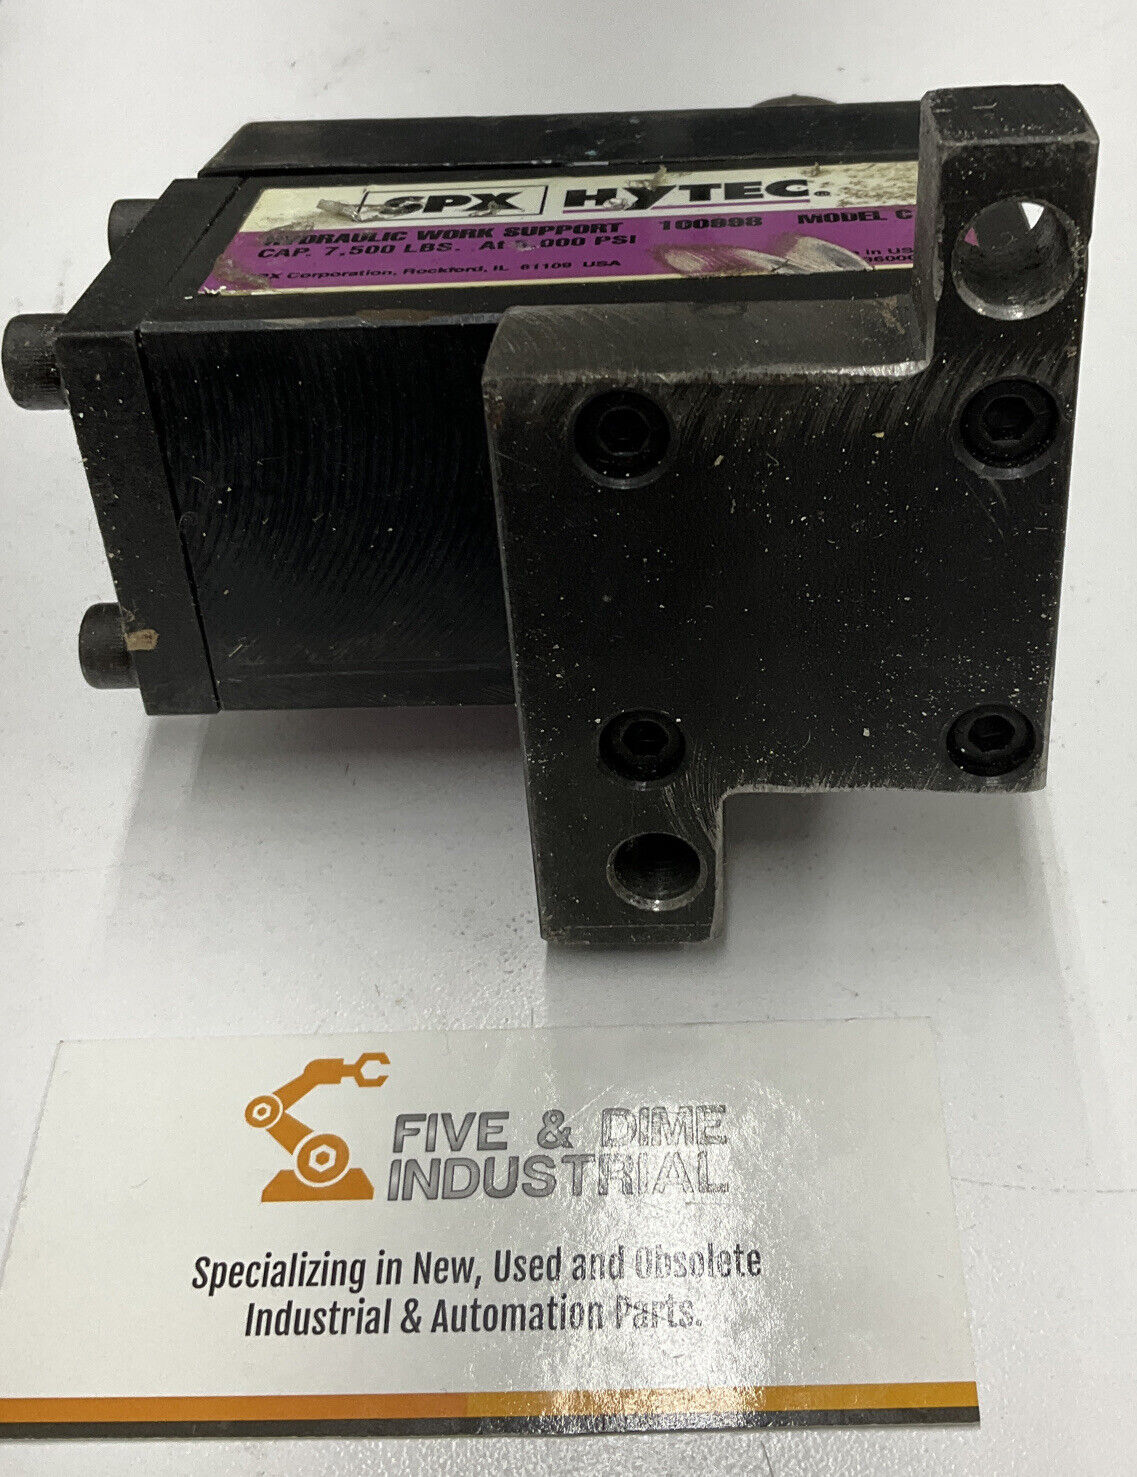 SPX Hytec 100998 Hydraulic Work Support Model C (RE103) - 0